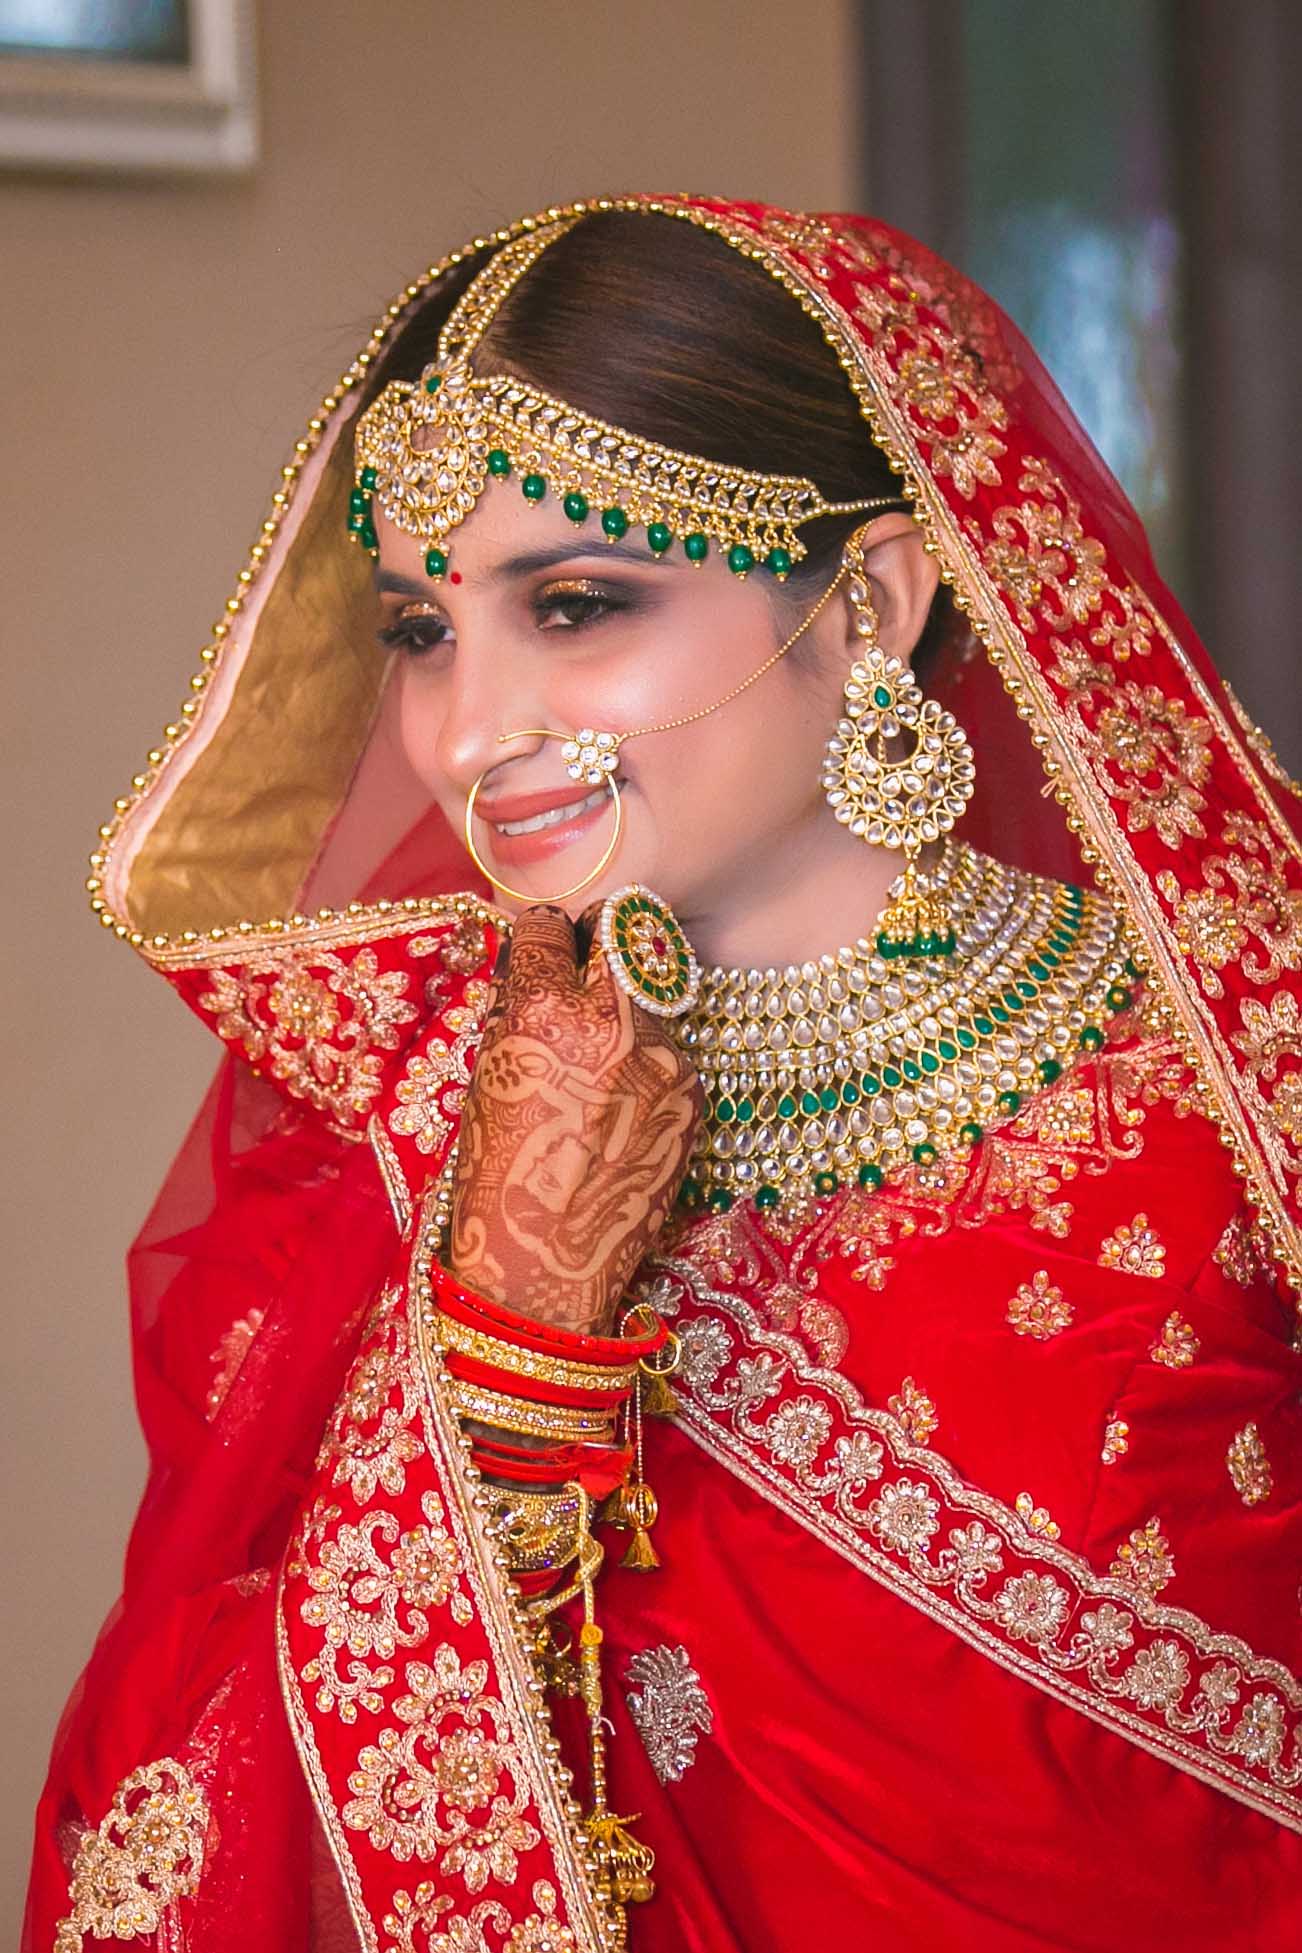 Bride's bridal necklace and earrings, captured by Harsh Studio Photography, Wedding photographer in Indore, Madhya Pradesh, India.